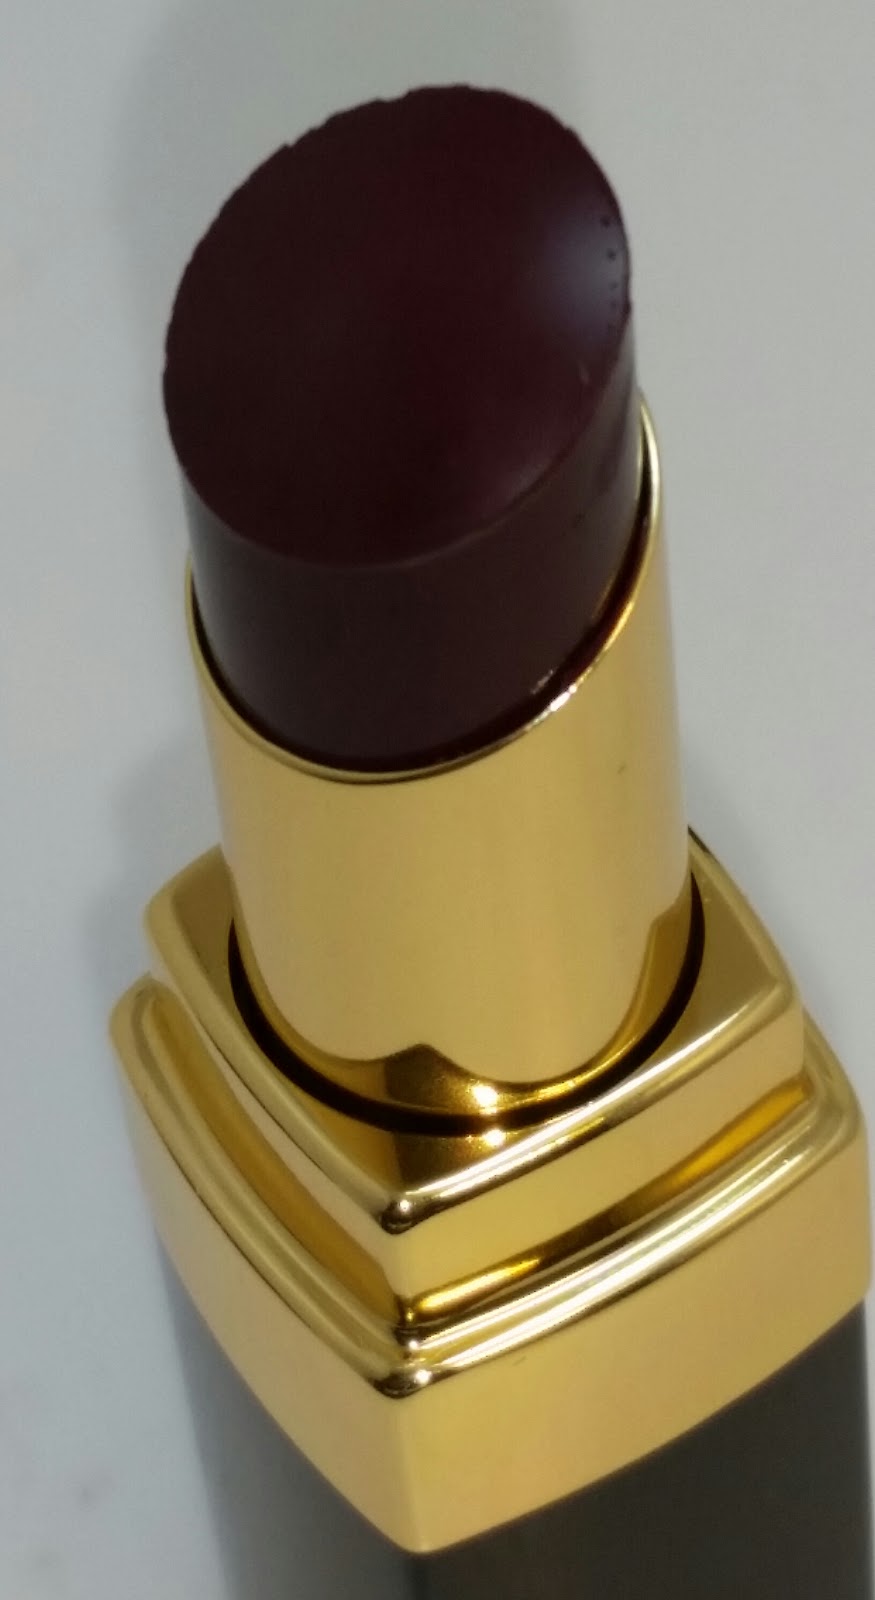 Jayded Dreaming Beauty Blog : 96 AURA CHANEL ROUGE COCO SHINE